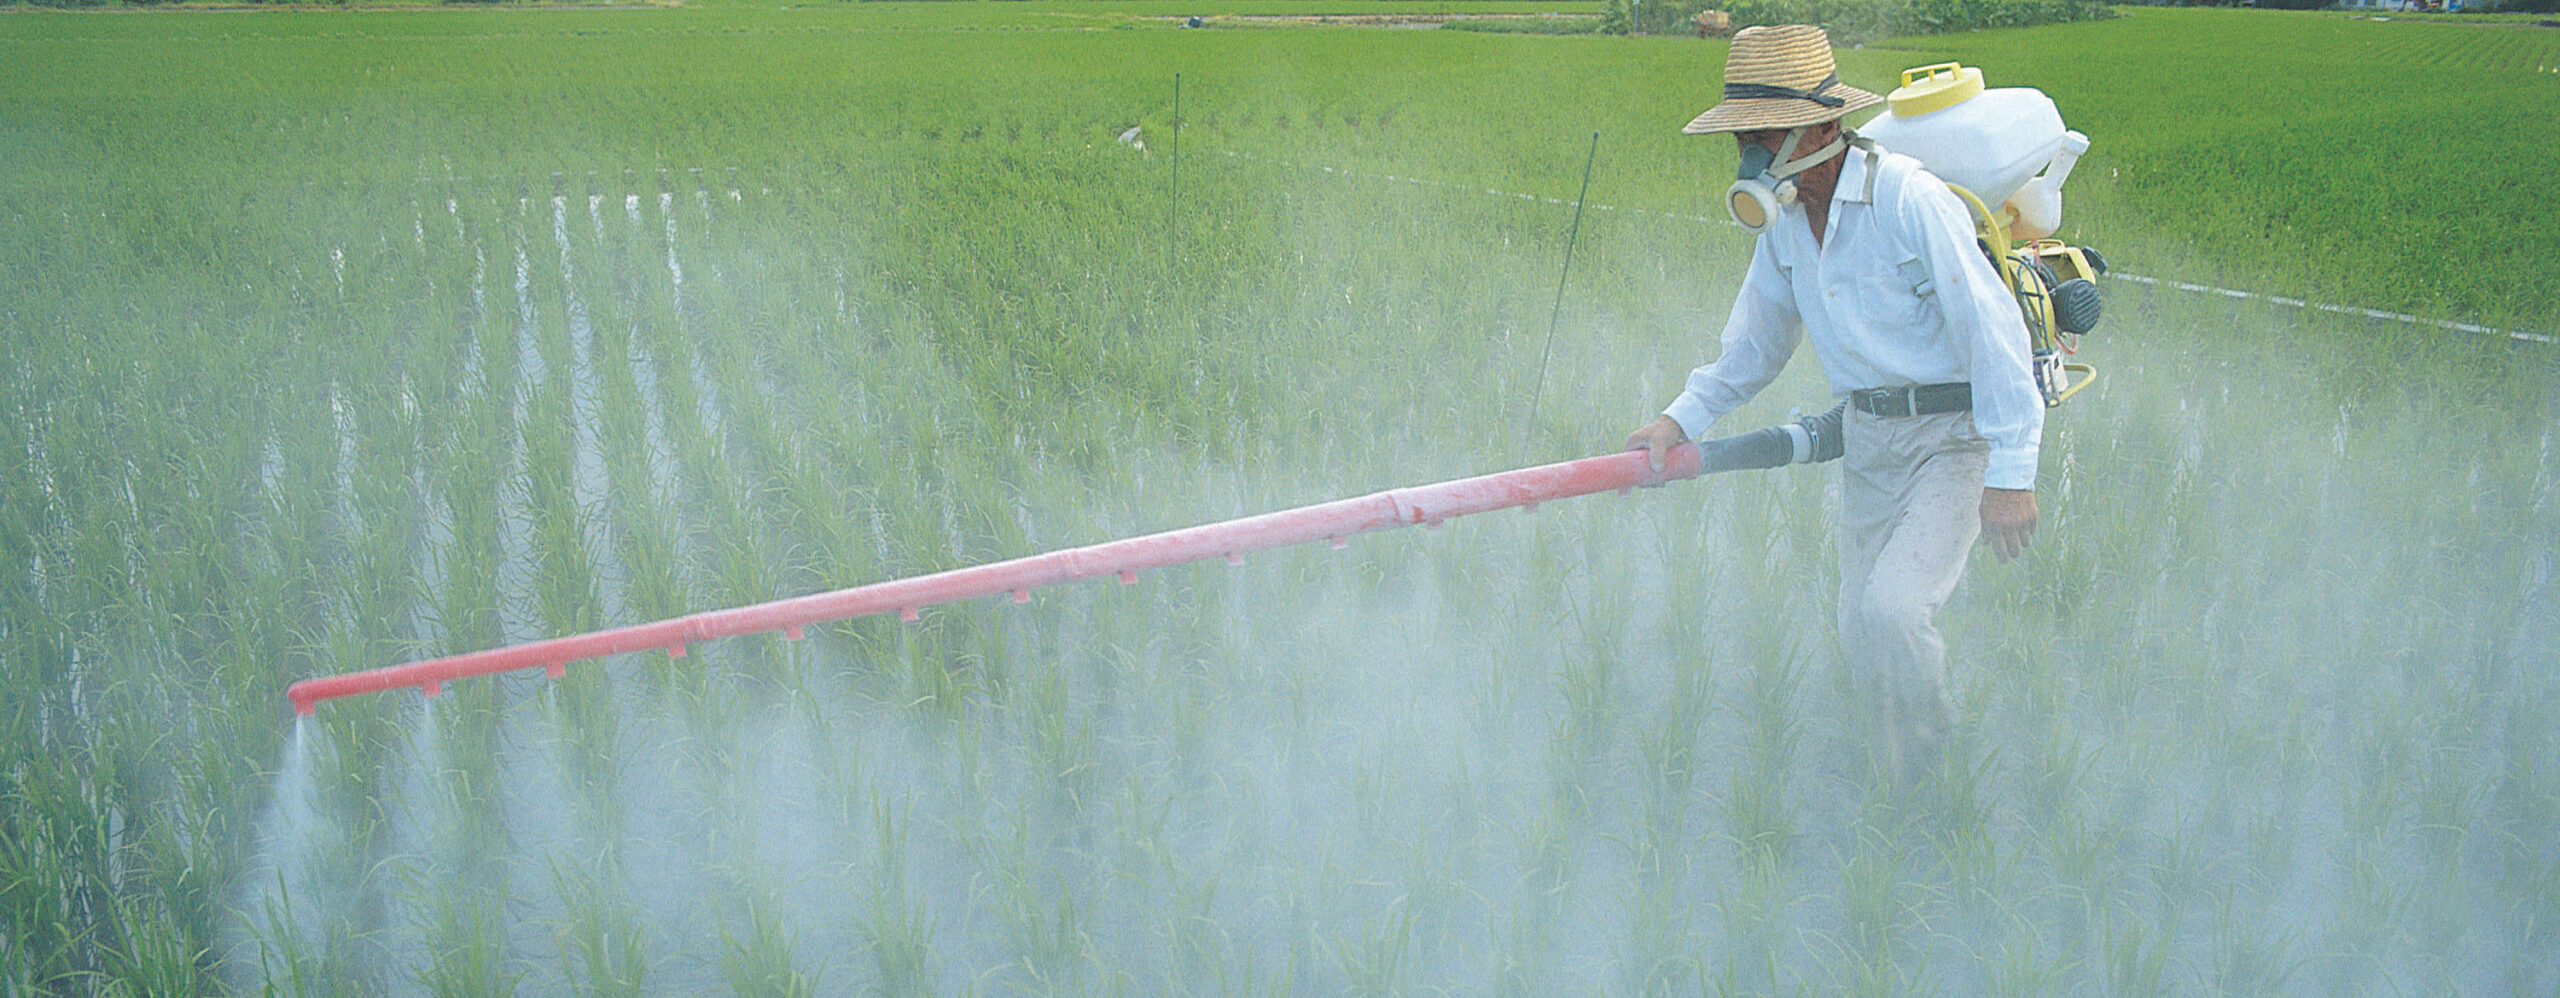 The Devastating Impact of Pesticides on the Environment